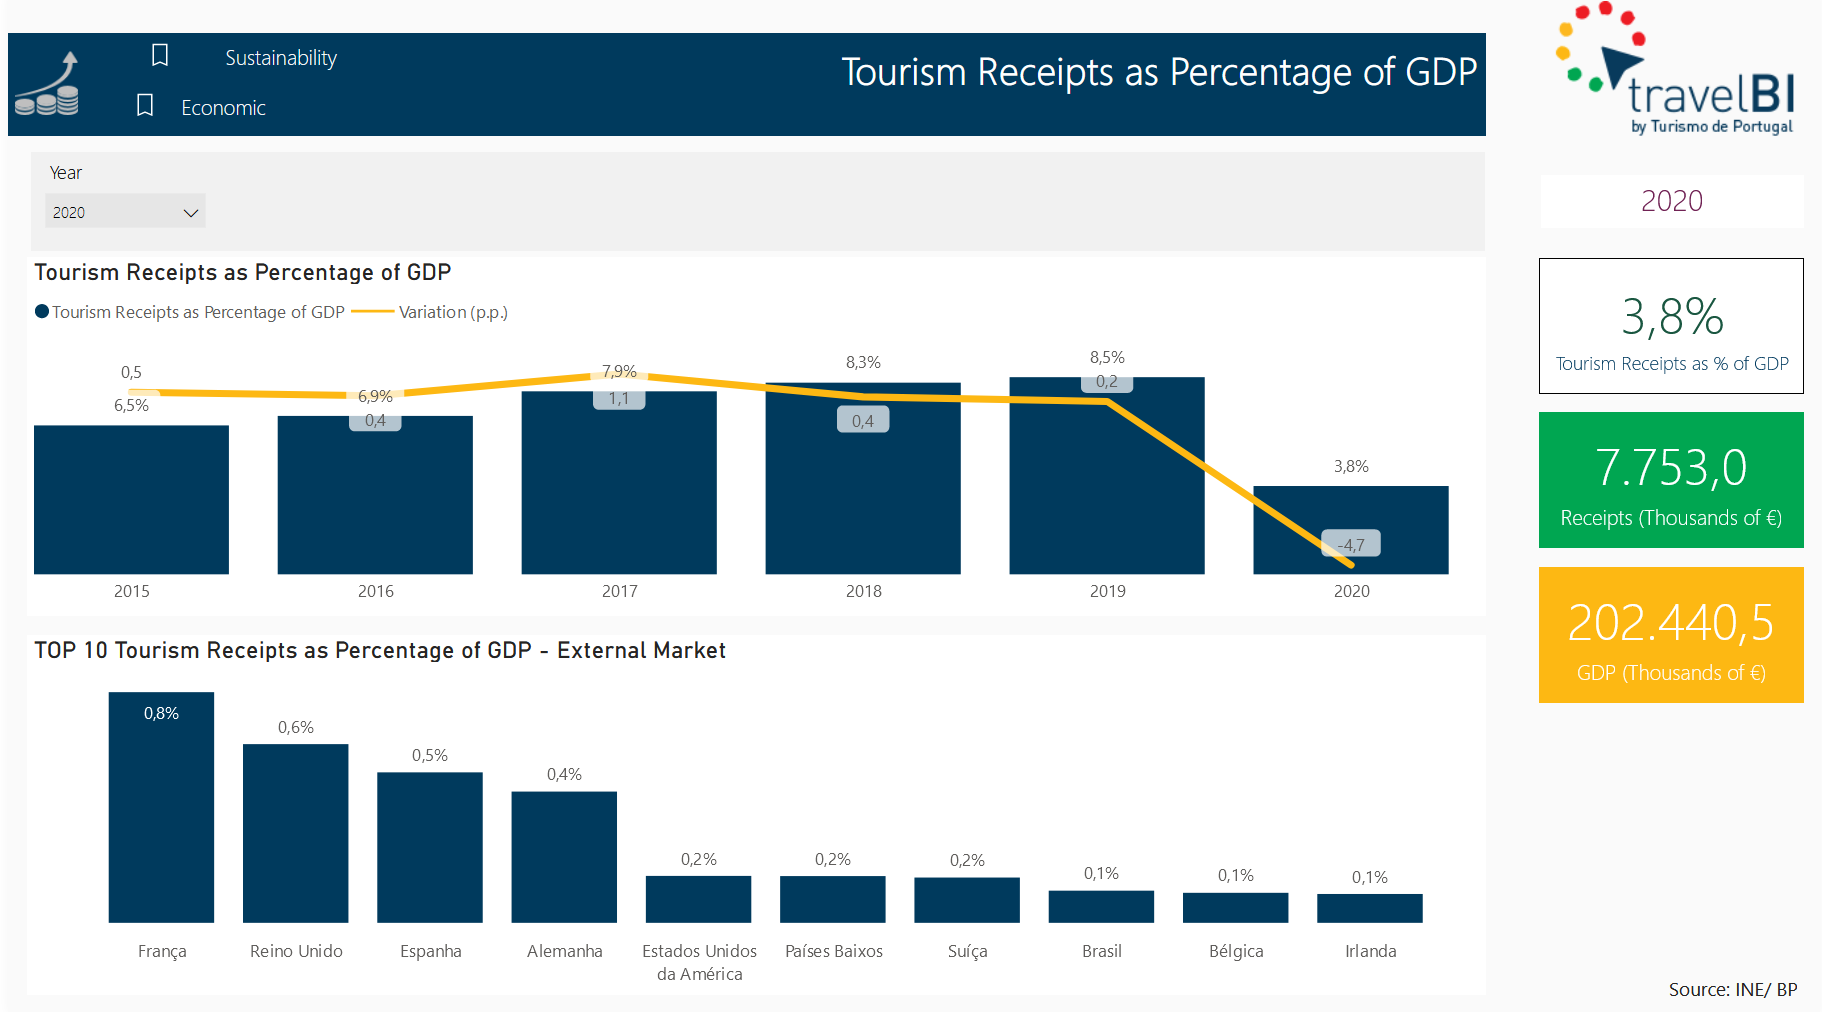 Tourism Receipts as Percentage of GDP